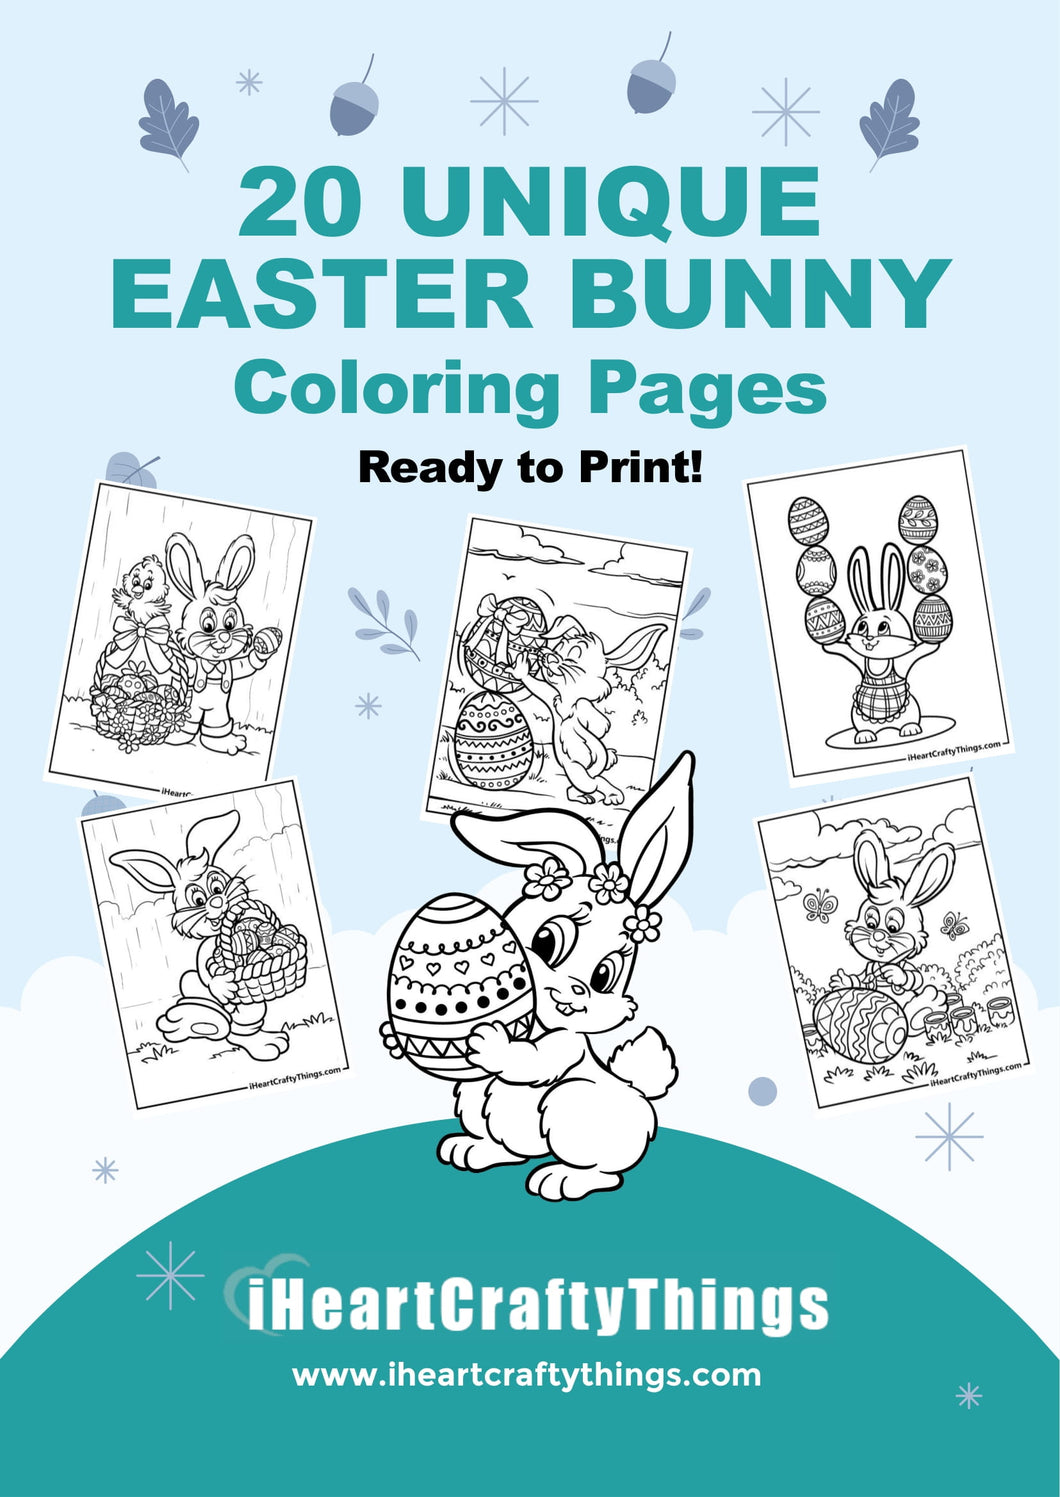 Easter Coloring: One Stamp, Three Coloring Techniques. - Crafty Pianist